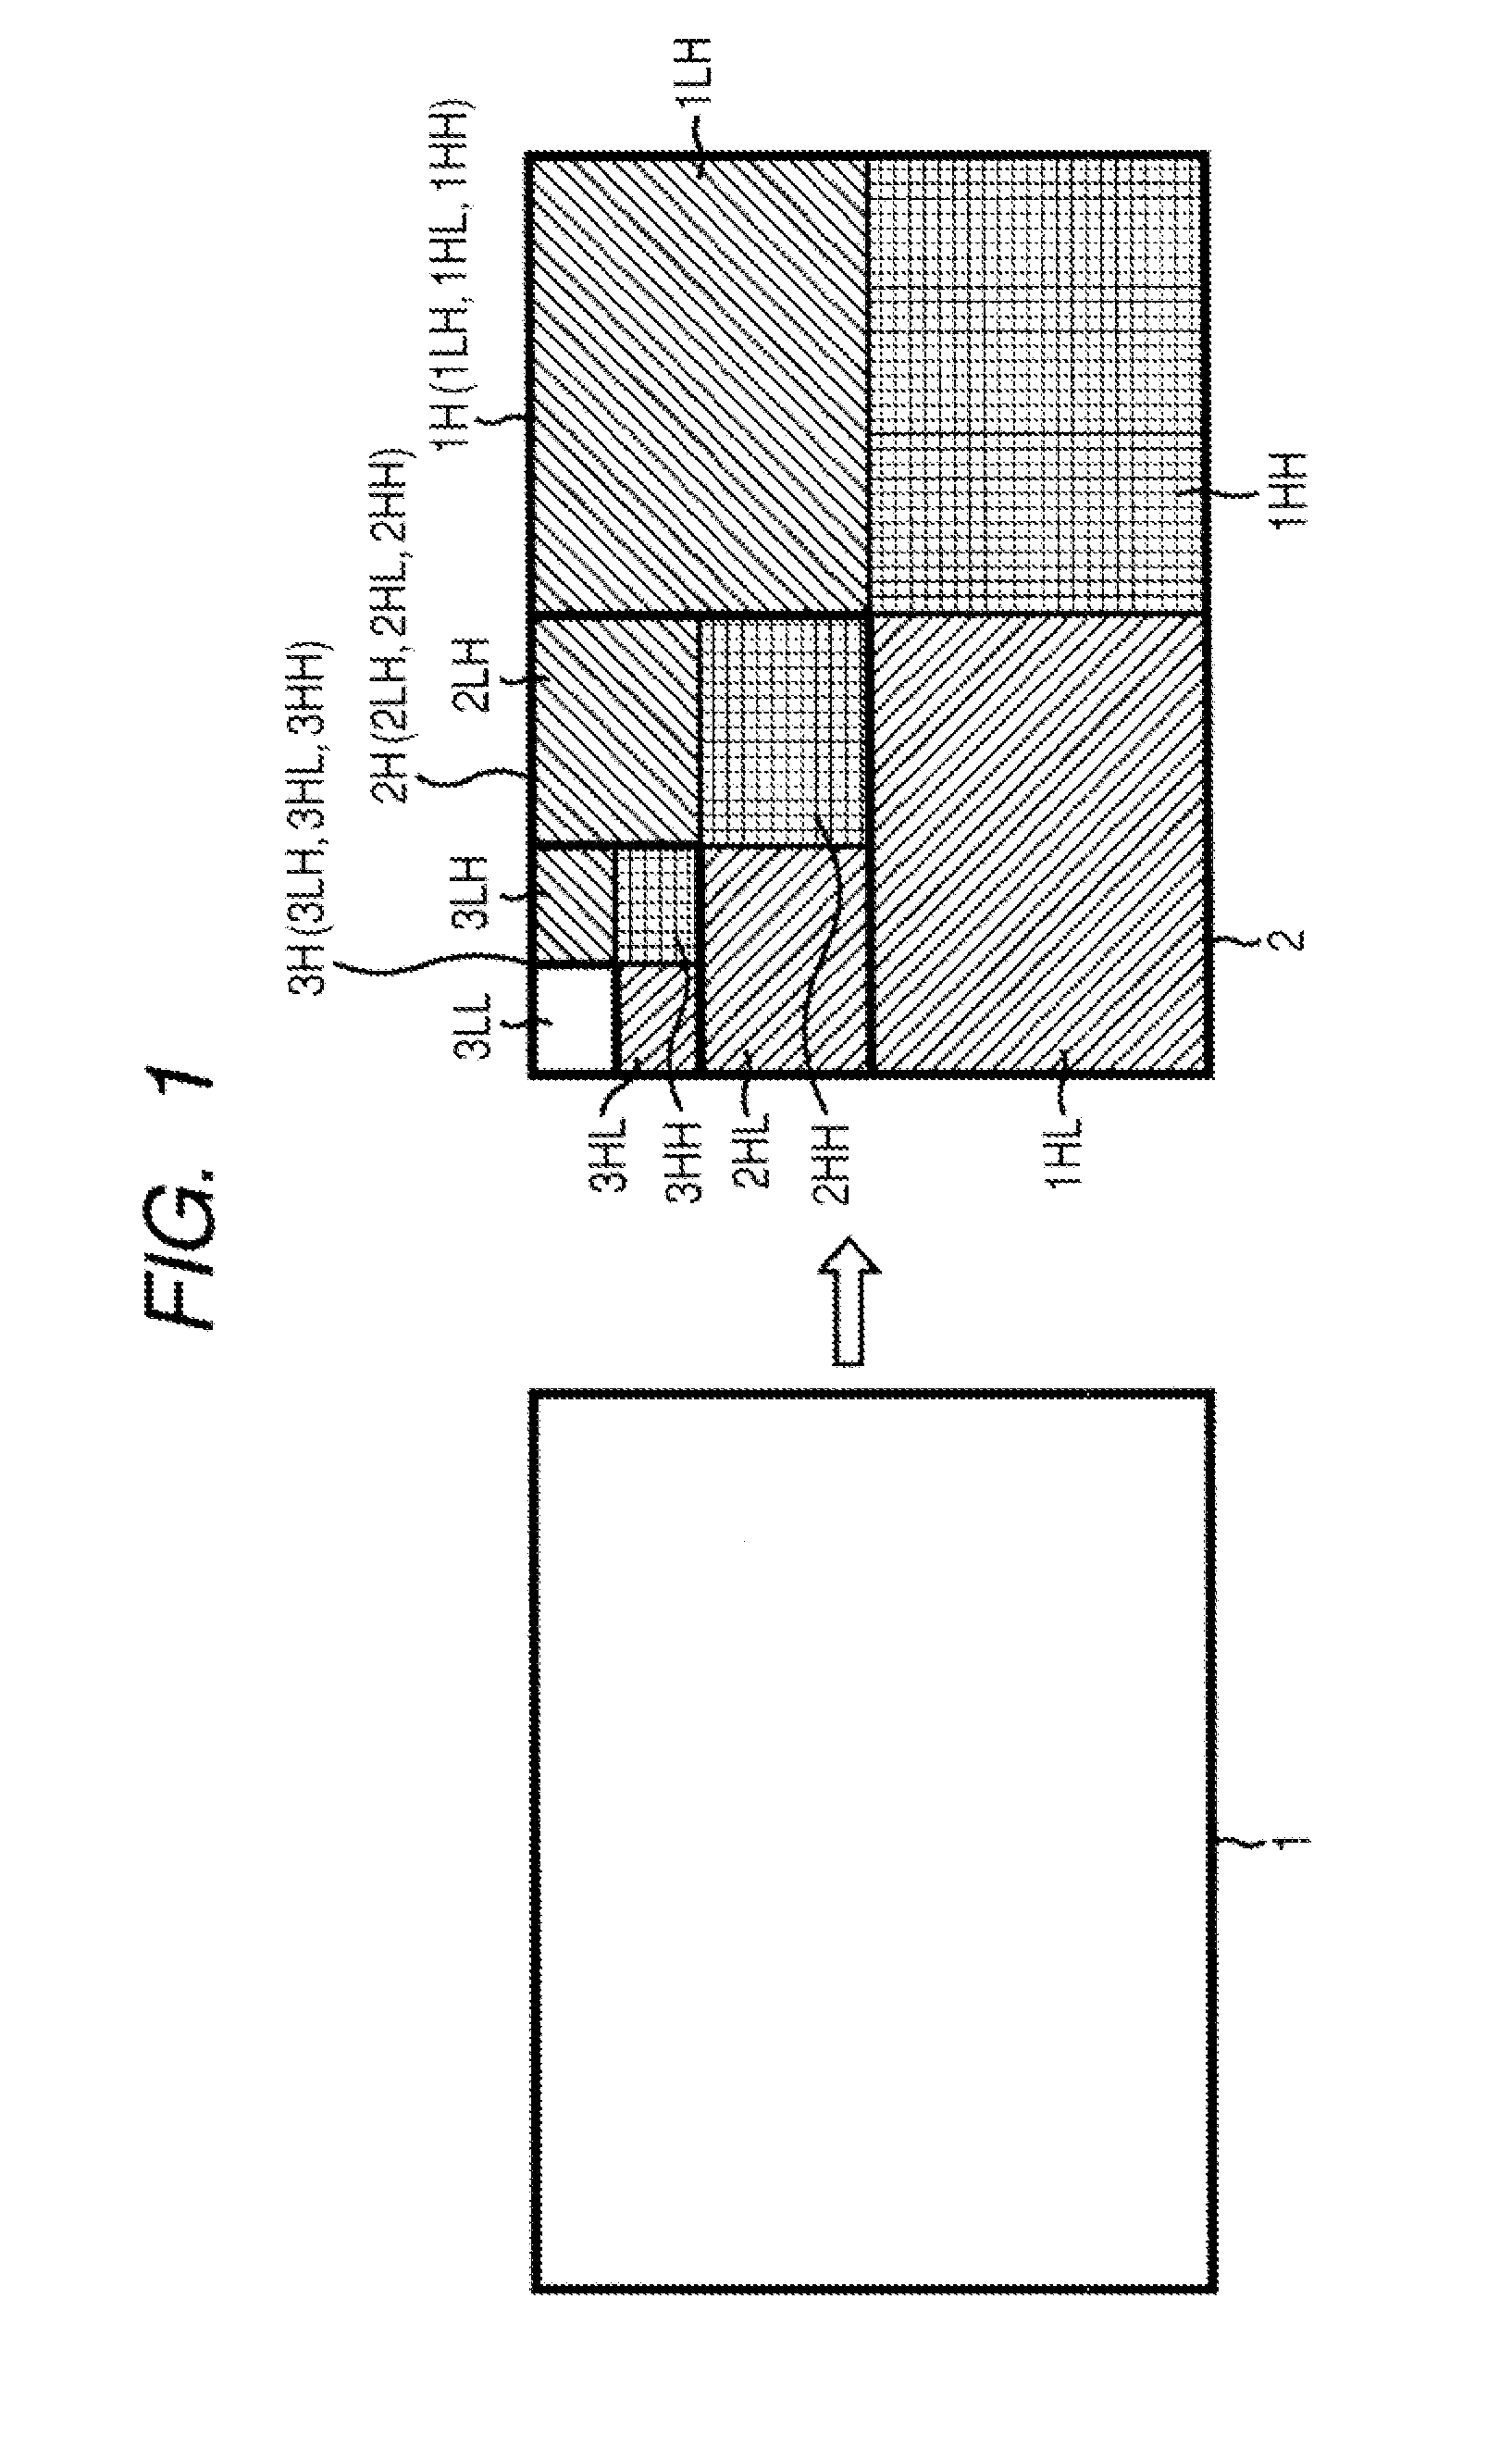 Information processing apparatus, computer-readable storage medium, and method for sending packetized frequency components of precincts of image data to another device